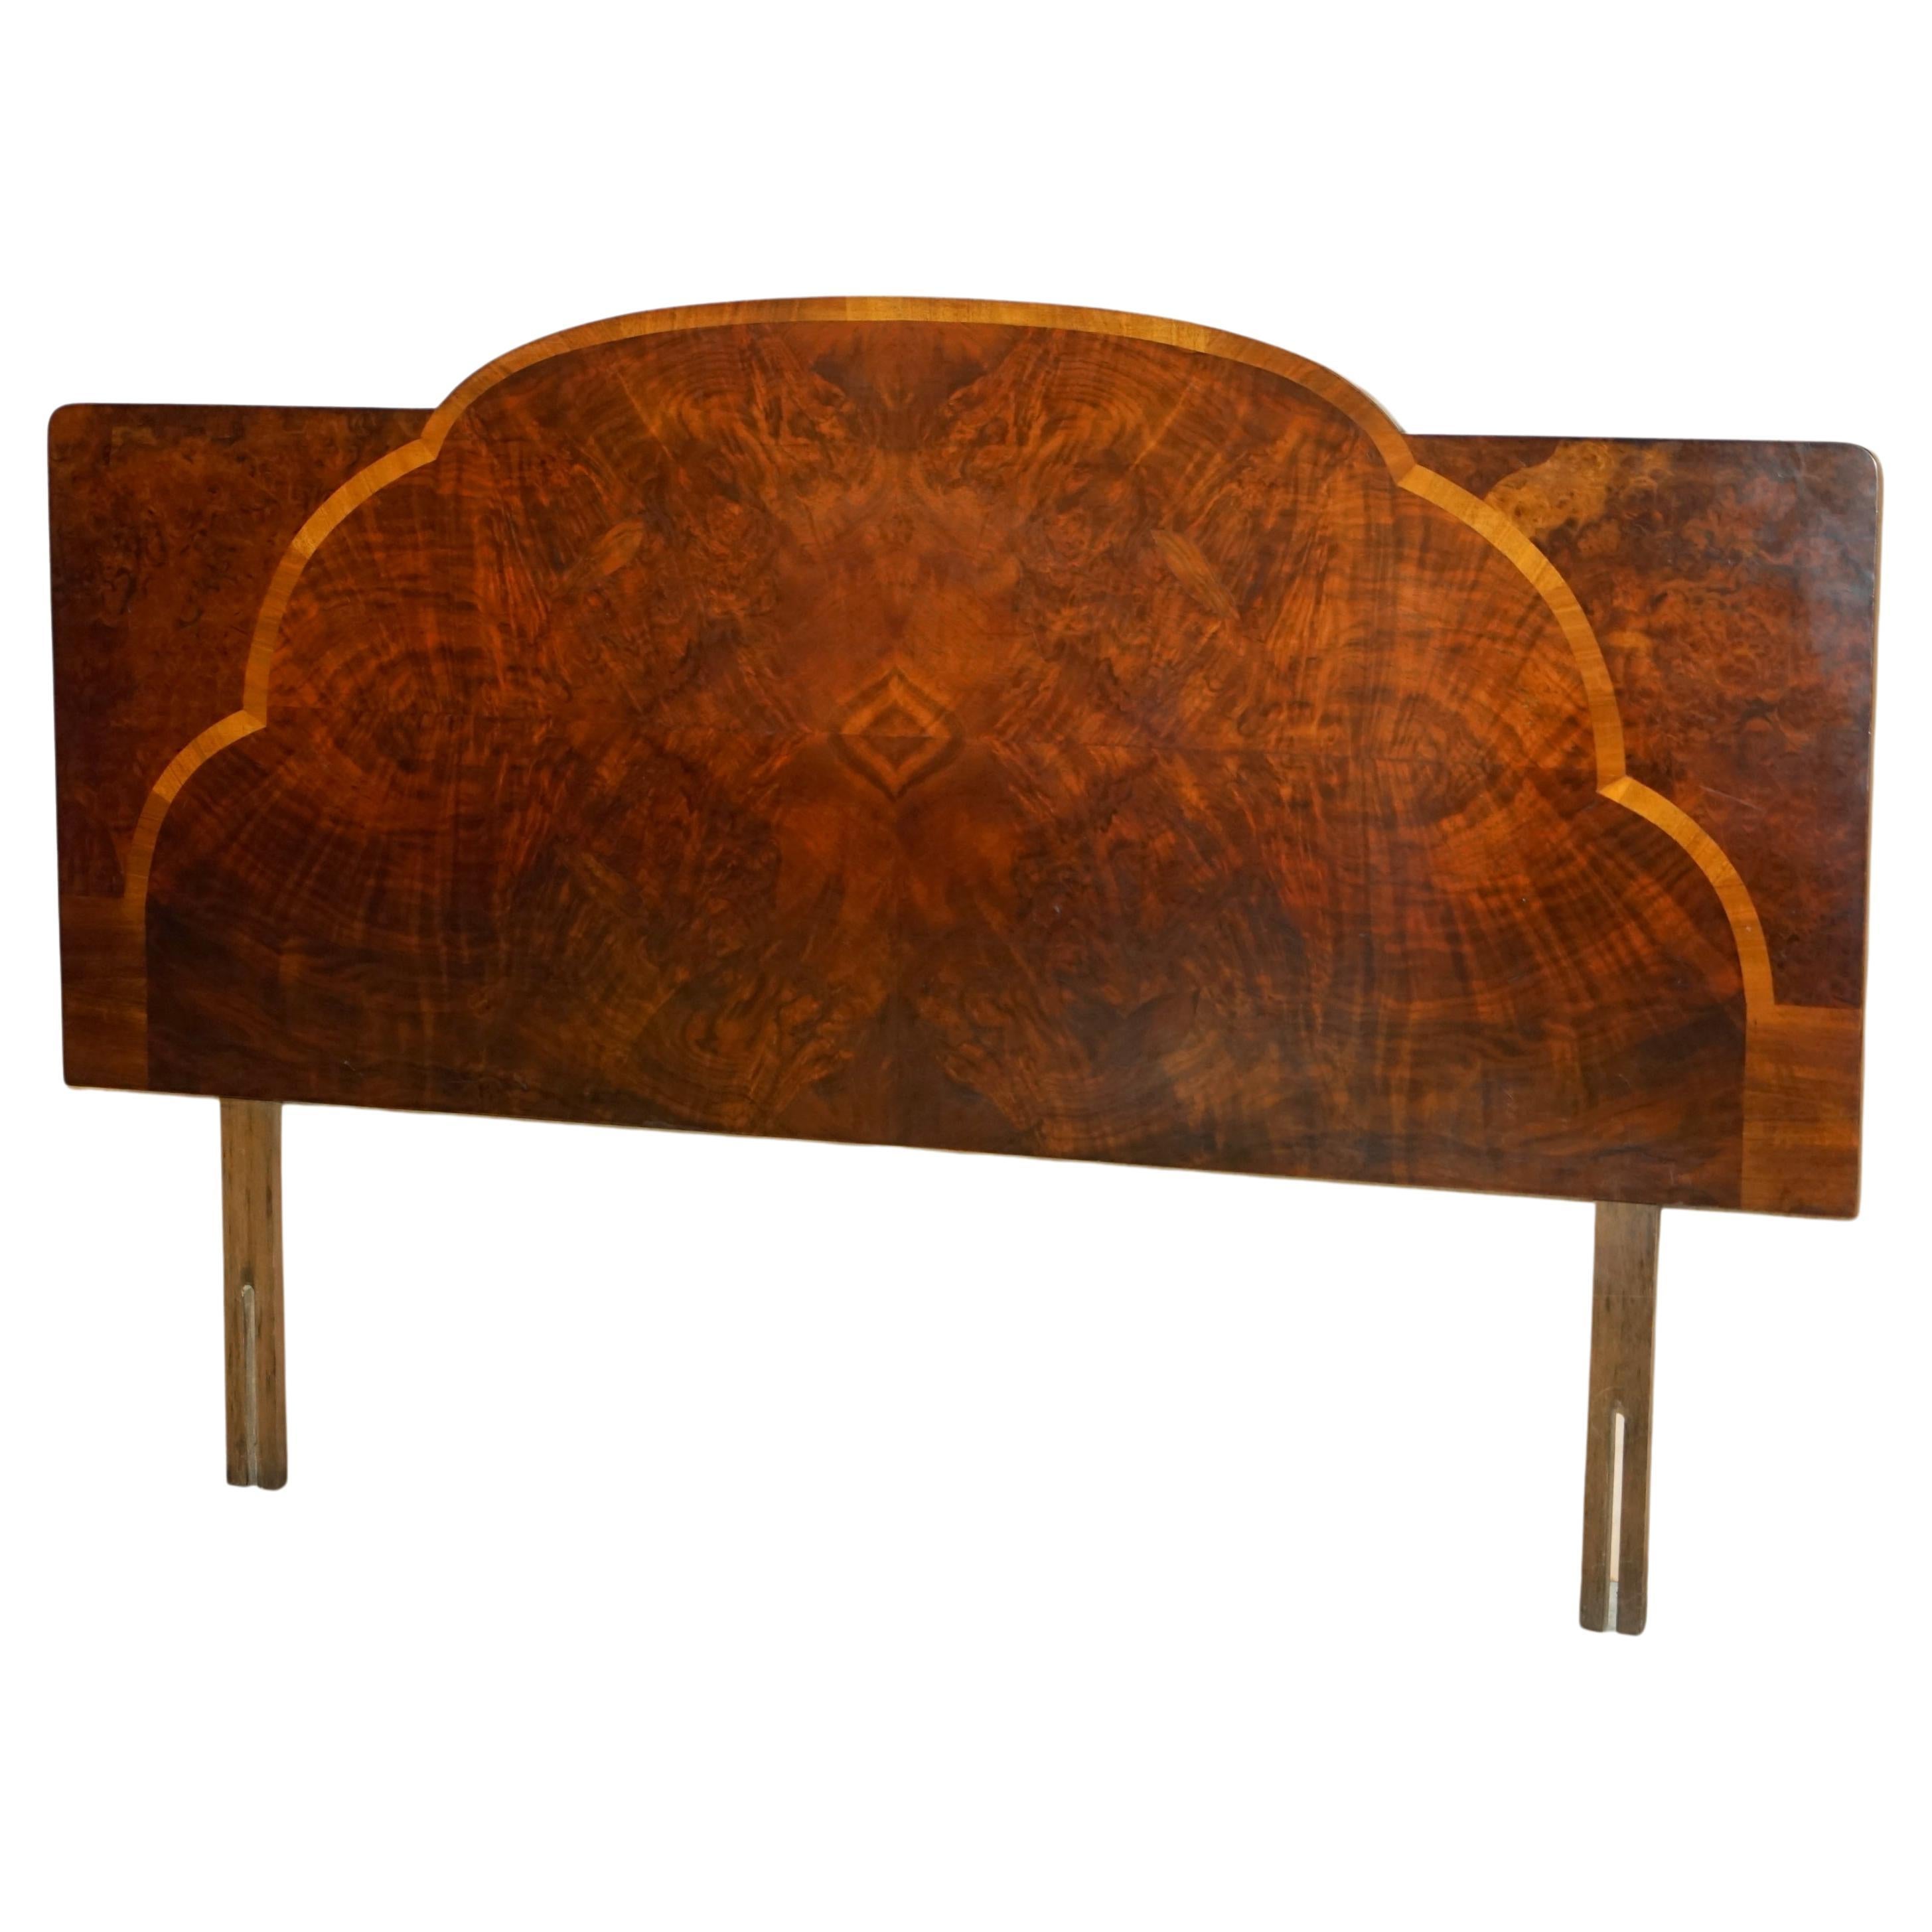 Antique circa 1920 Burr Walnut Double Headboard Which Is Part of a Large Suite